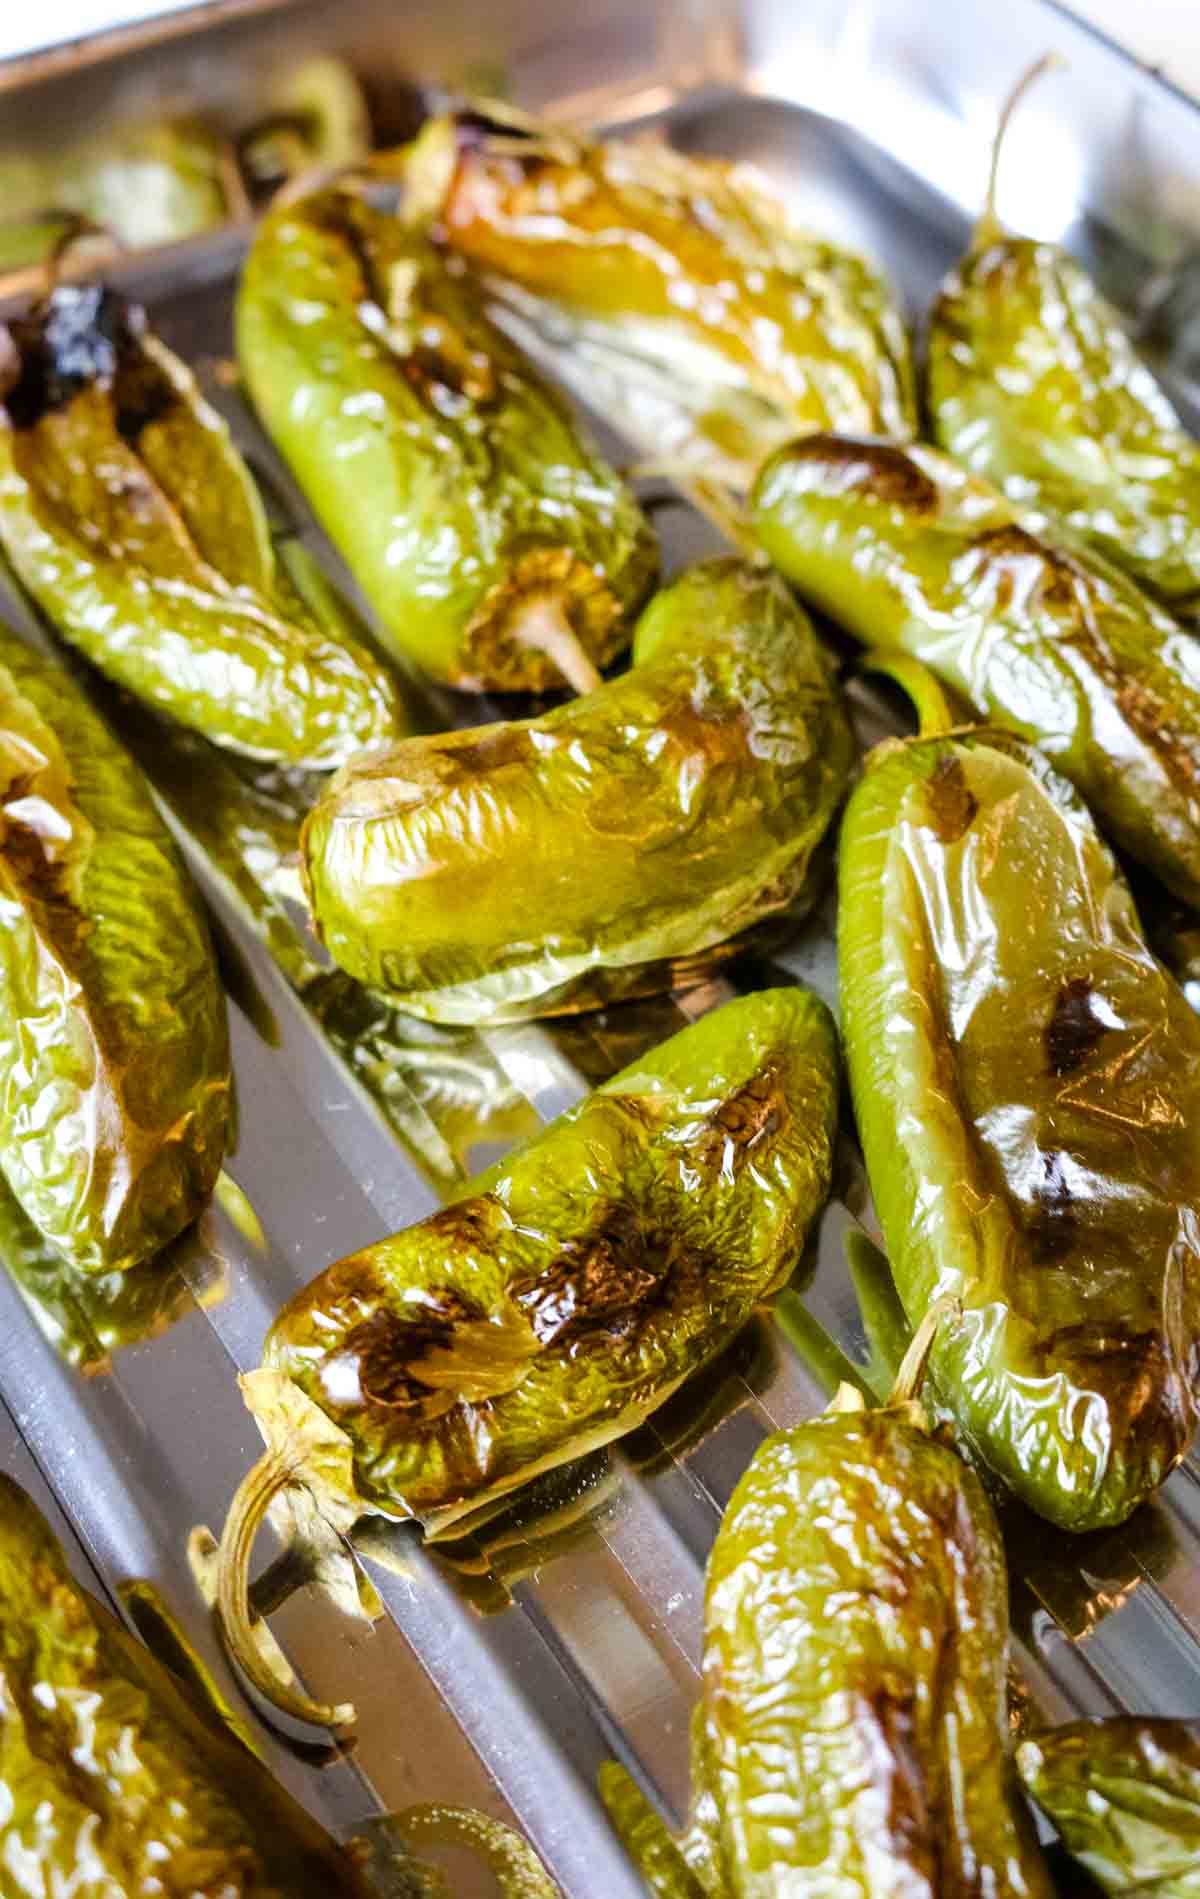 blistered and charred jalapeno peppers on a sheet.